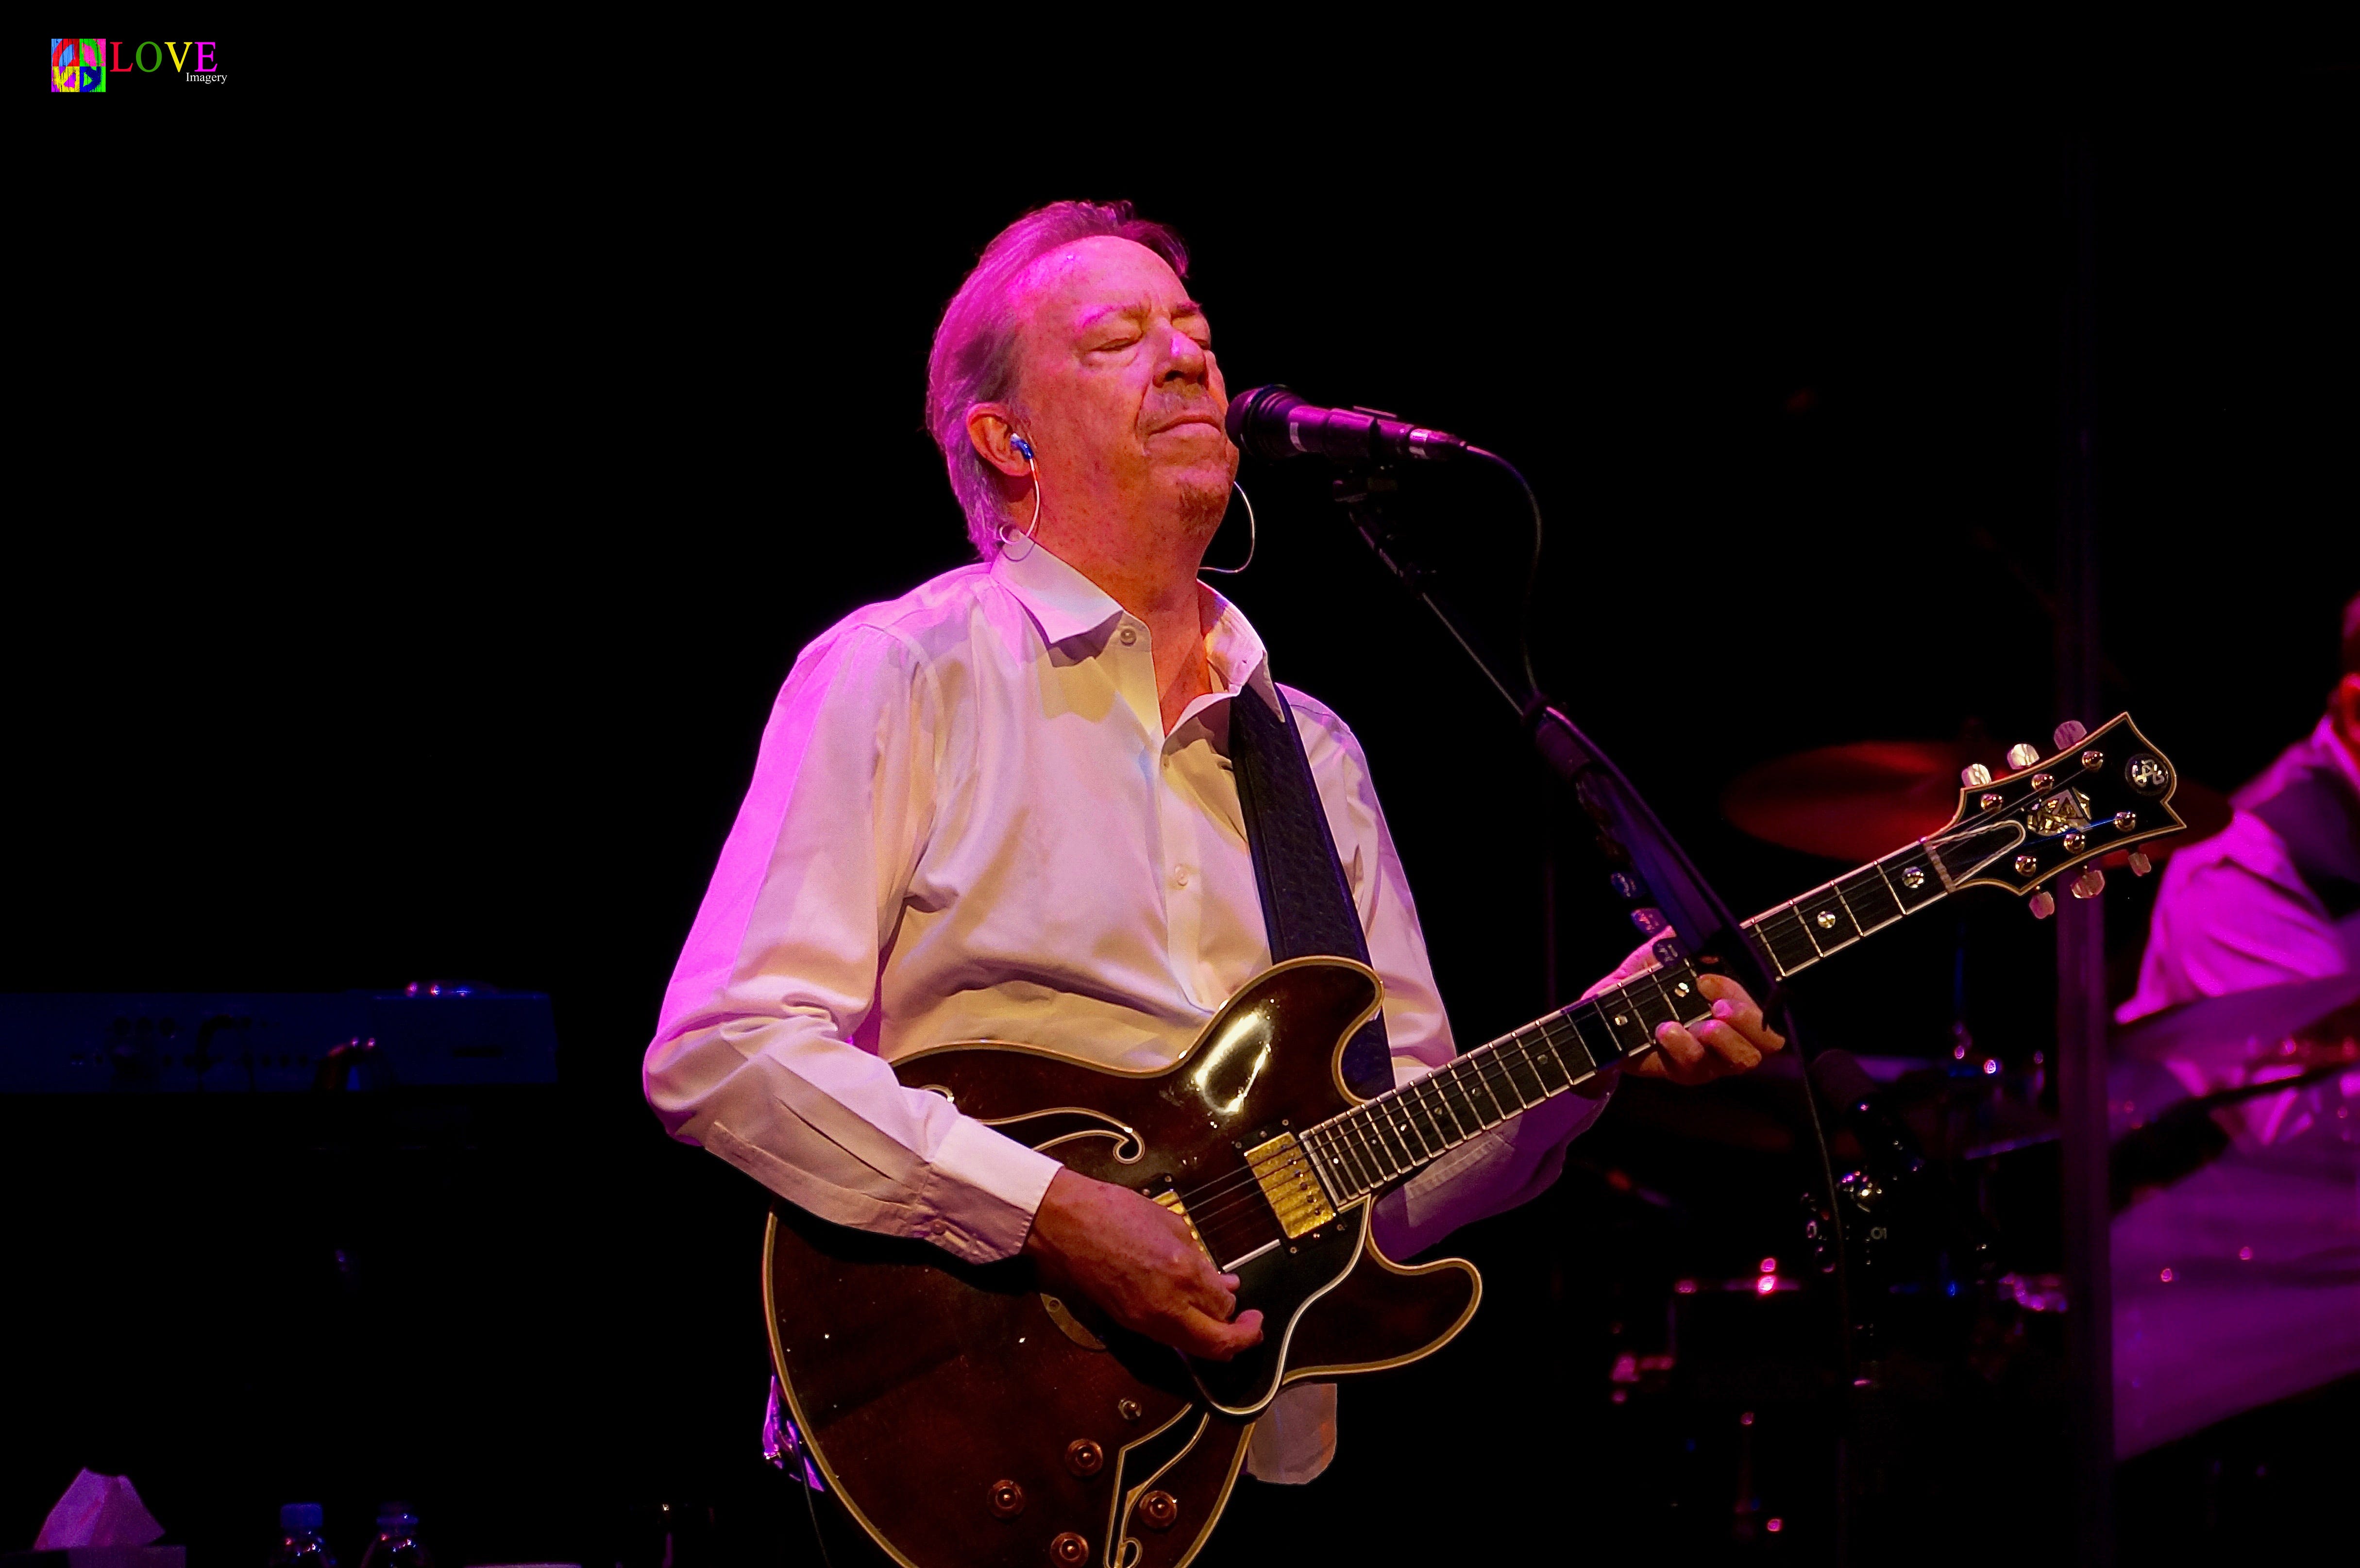 “From 8Track Tapes to Today — He’s Still Great!” Boz Scaggs LIVE! at